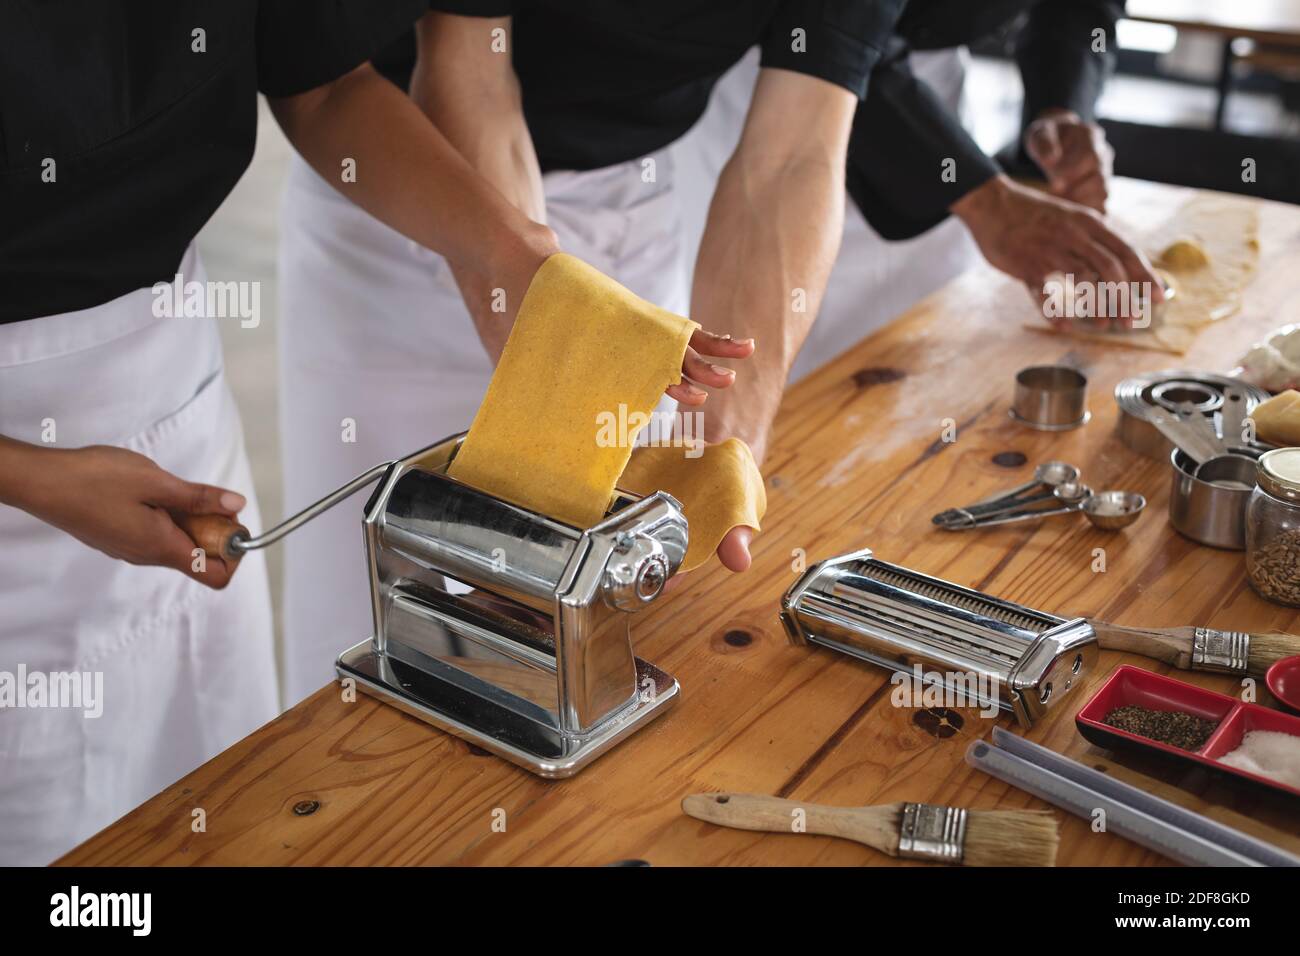 Mid section of male and female chef processing pasta sheet in machine at restaurant kitchen Stock Photo